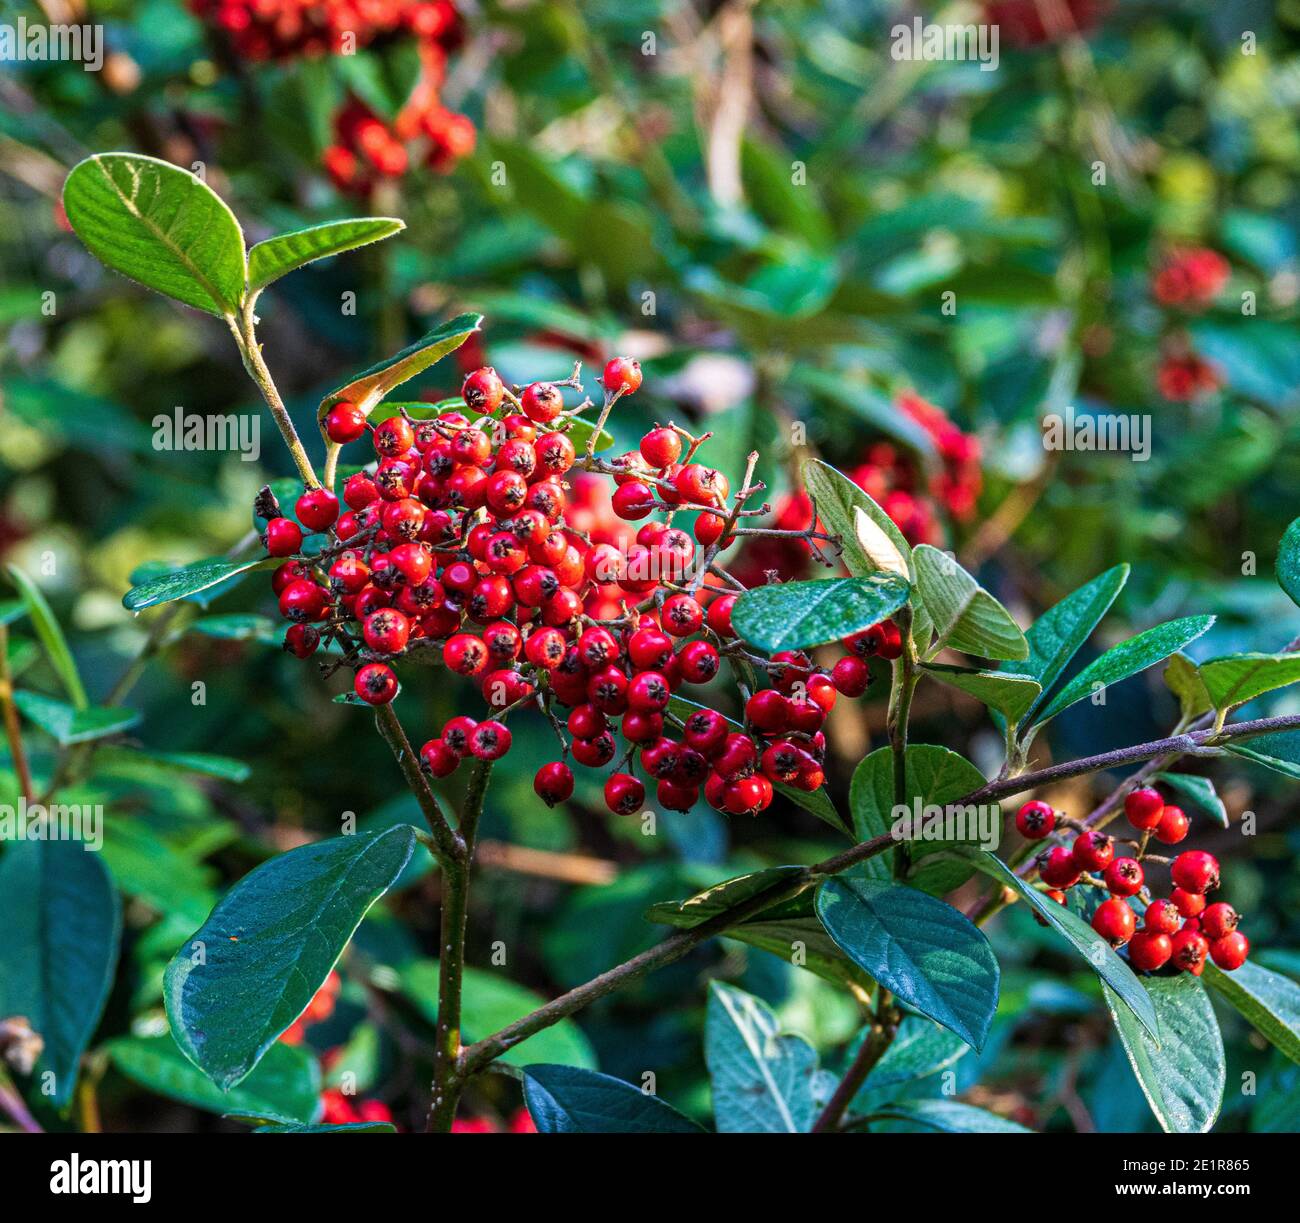 Late Cotoneaster, Cotoneaster lacteus, with red berry fruits in an ornamental landscape garden. An evergreen shrub. Stock Photo